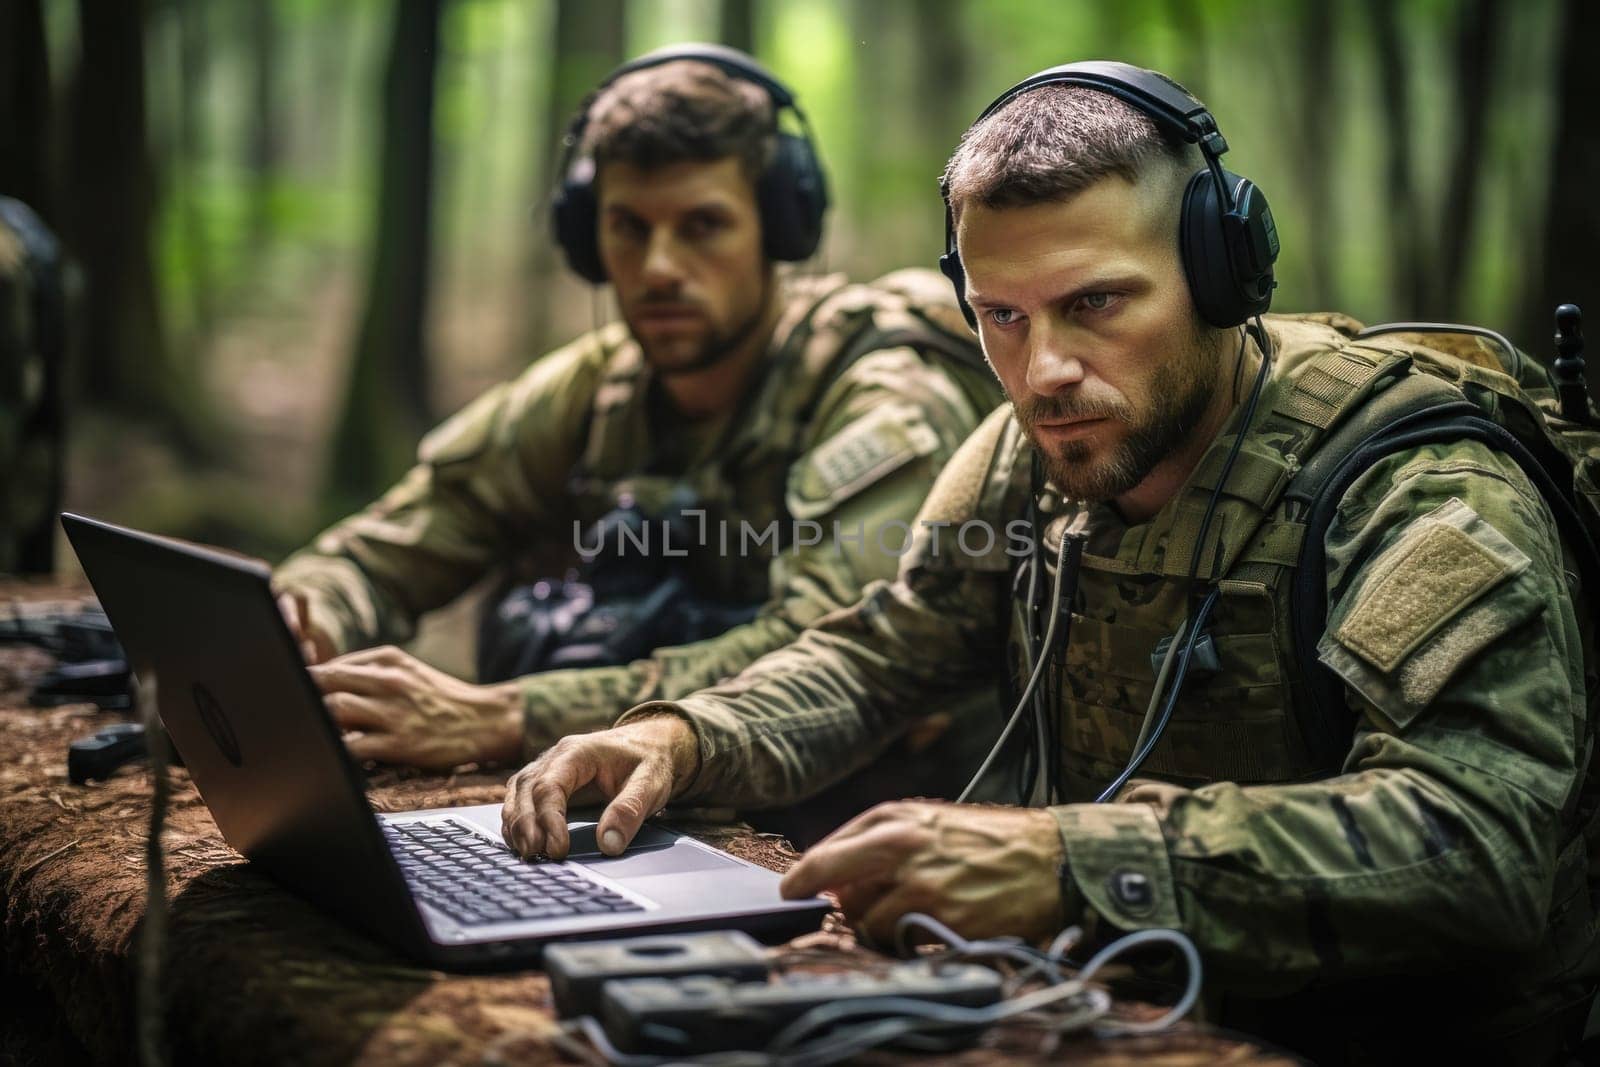 Concentrated military personnel in camouflage uniforms and headphones working hard at laptop among trees in forest.